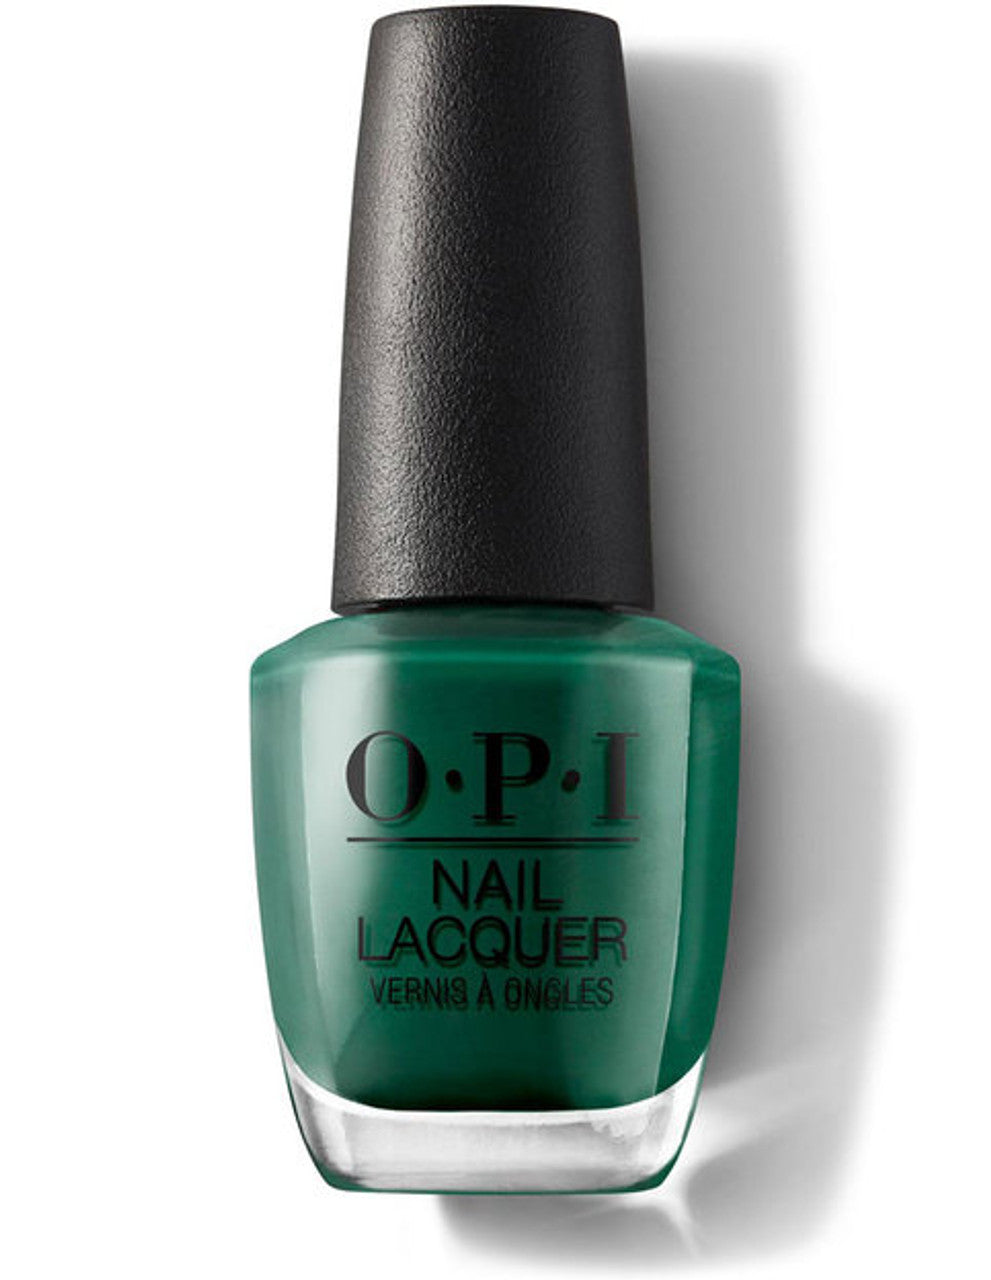 Stay Off The Lawn (OPI Nail Polish)